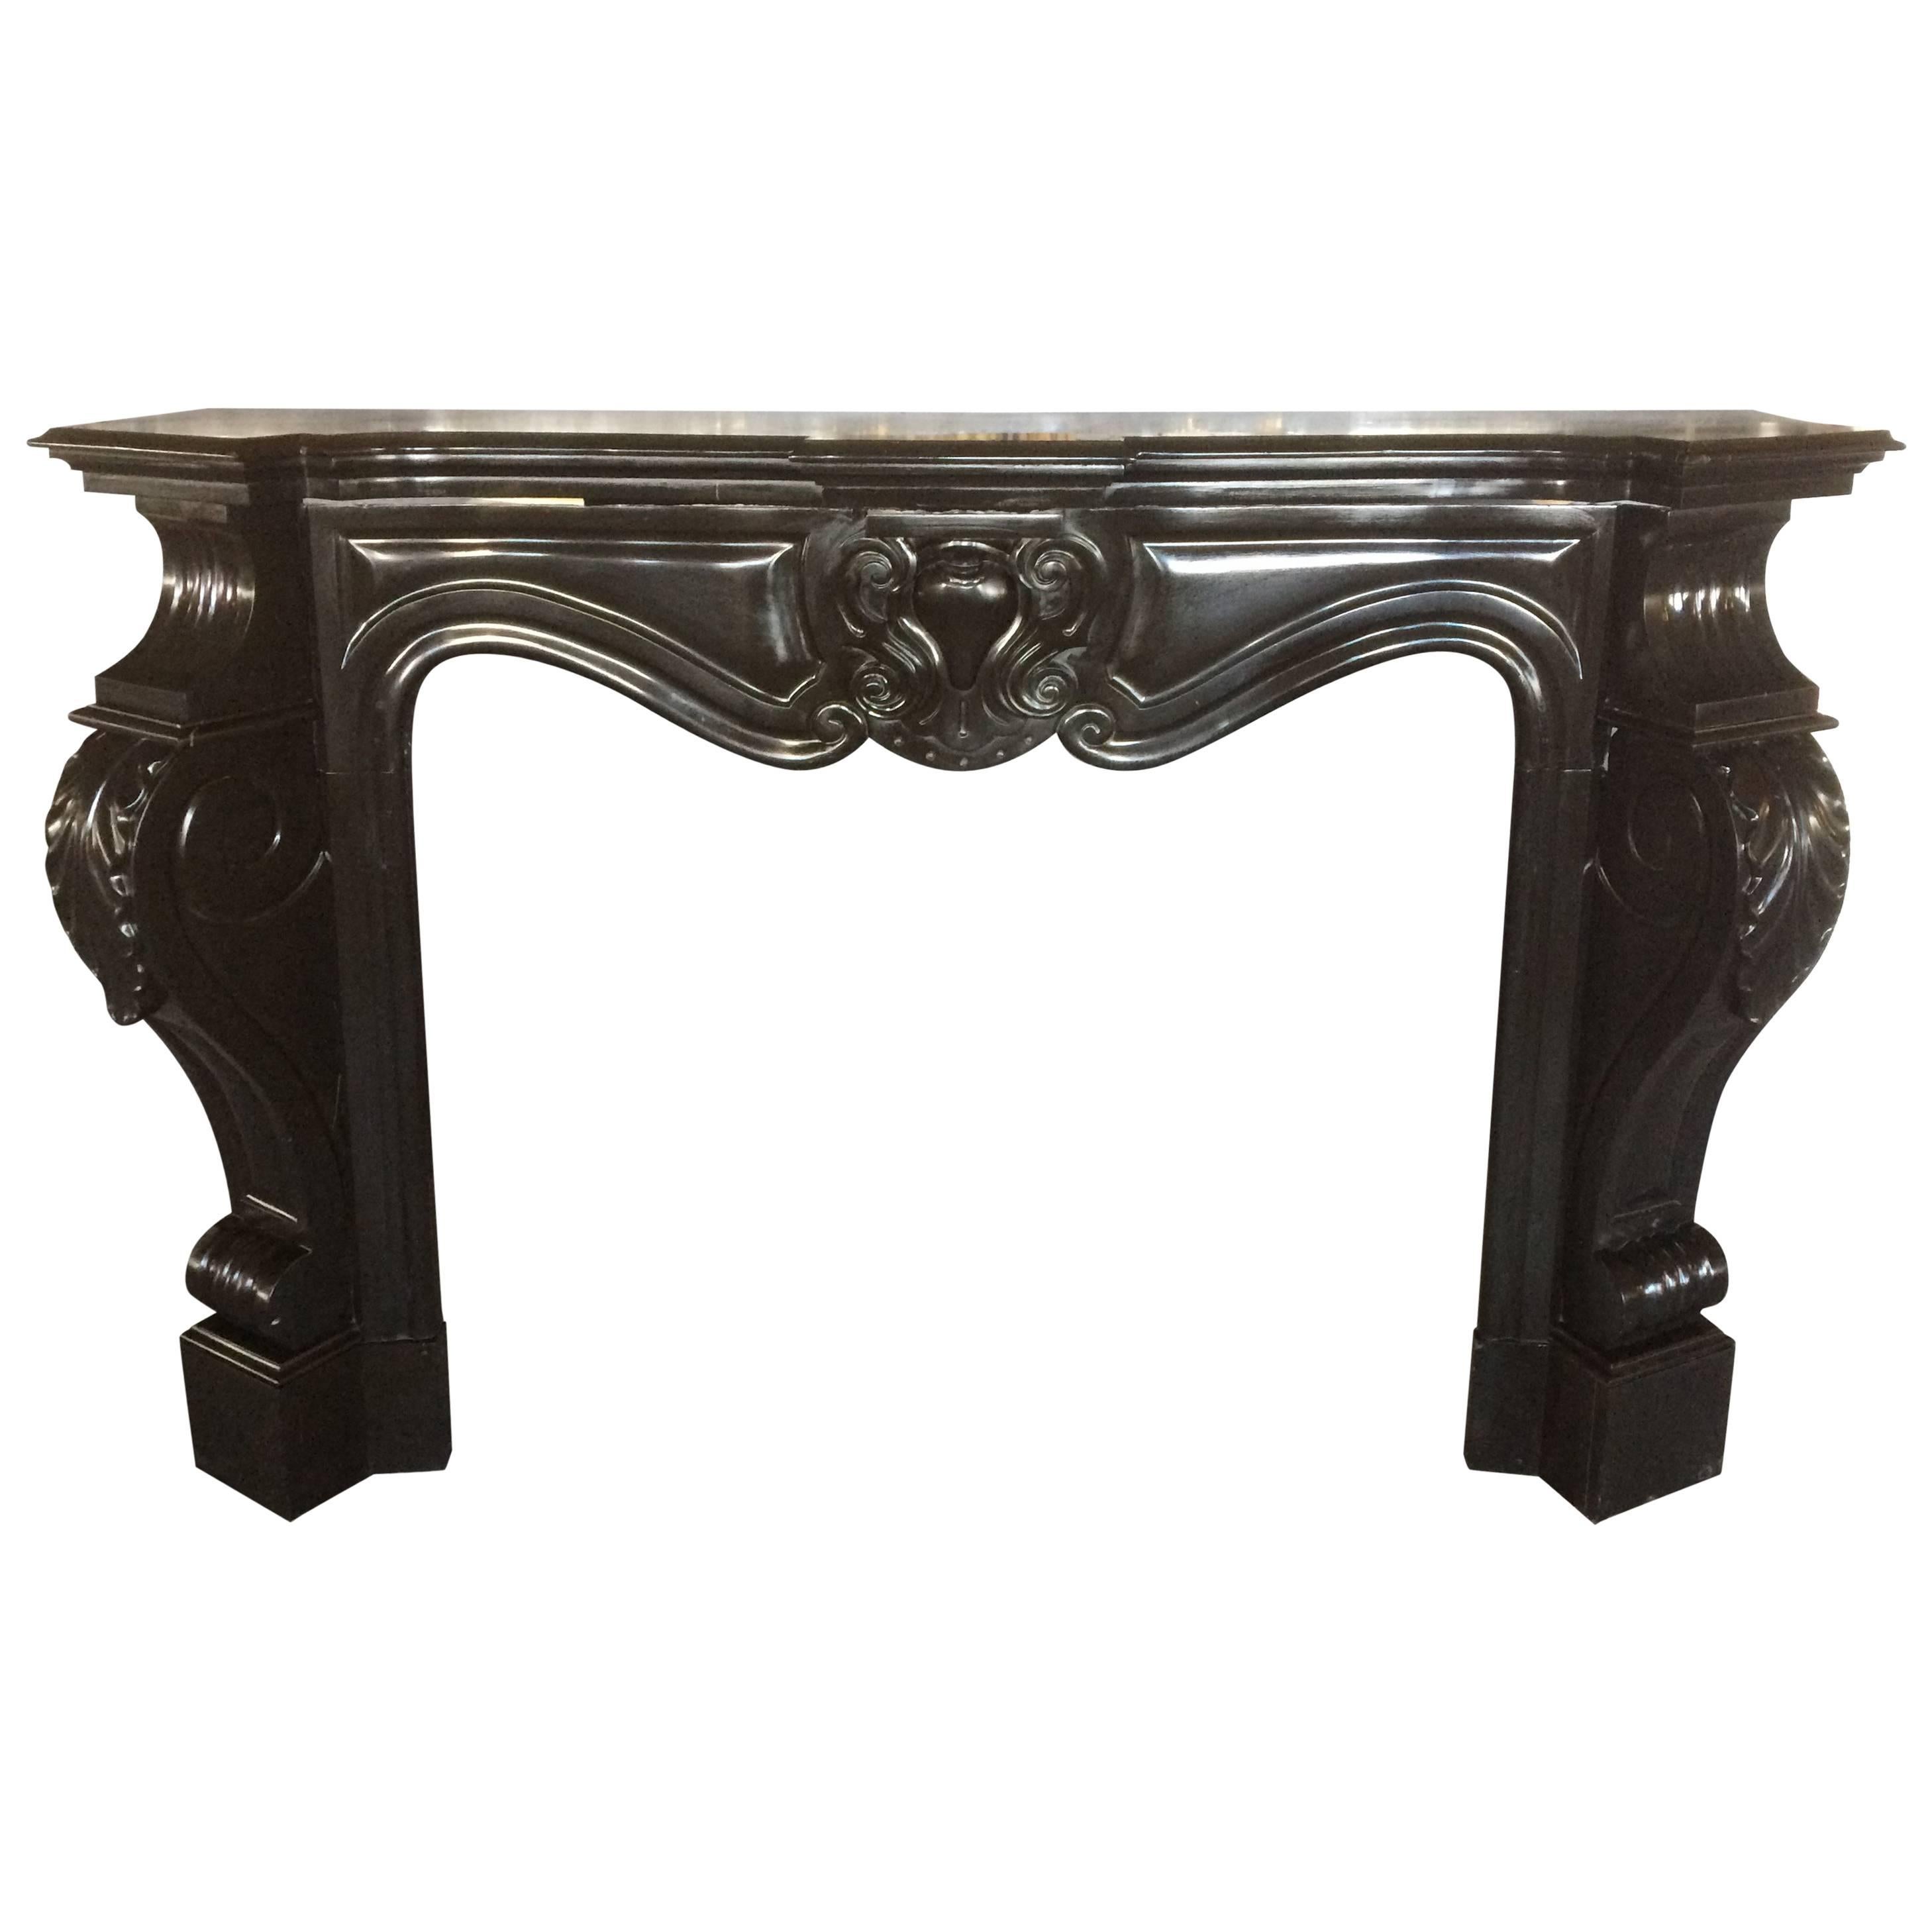 French Antique Louis XV-Regency Style Fireplace, circa 1850s from France For Sale